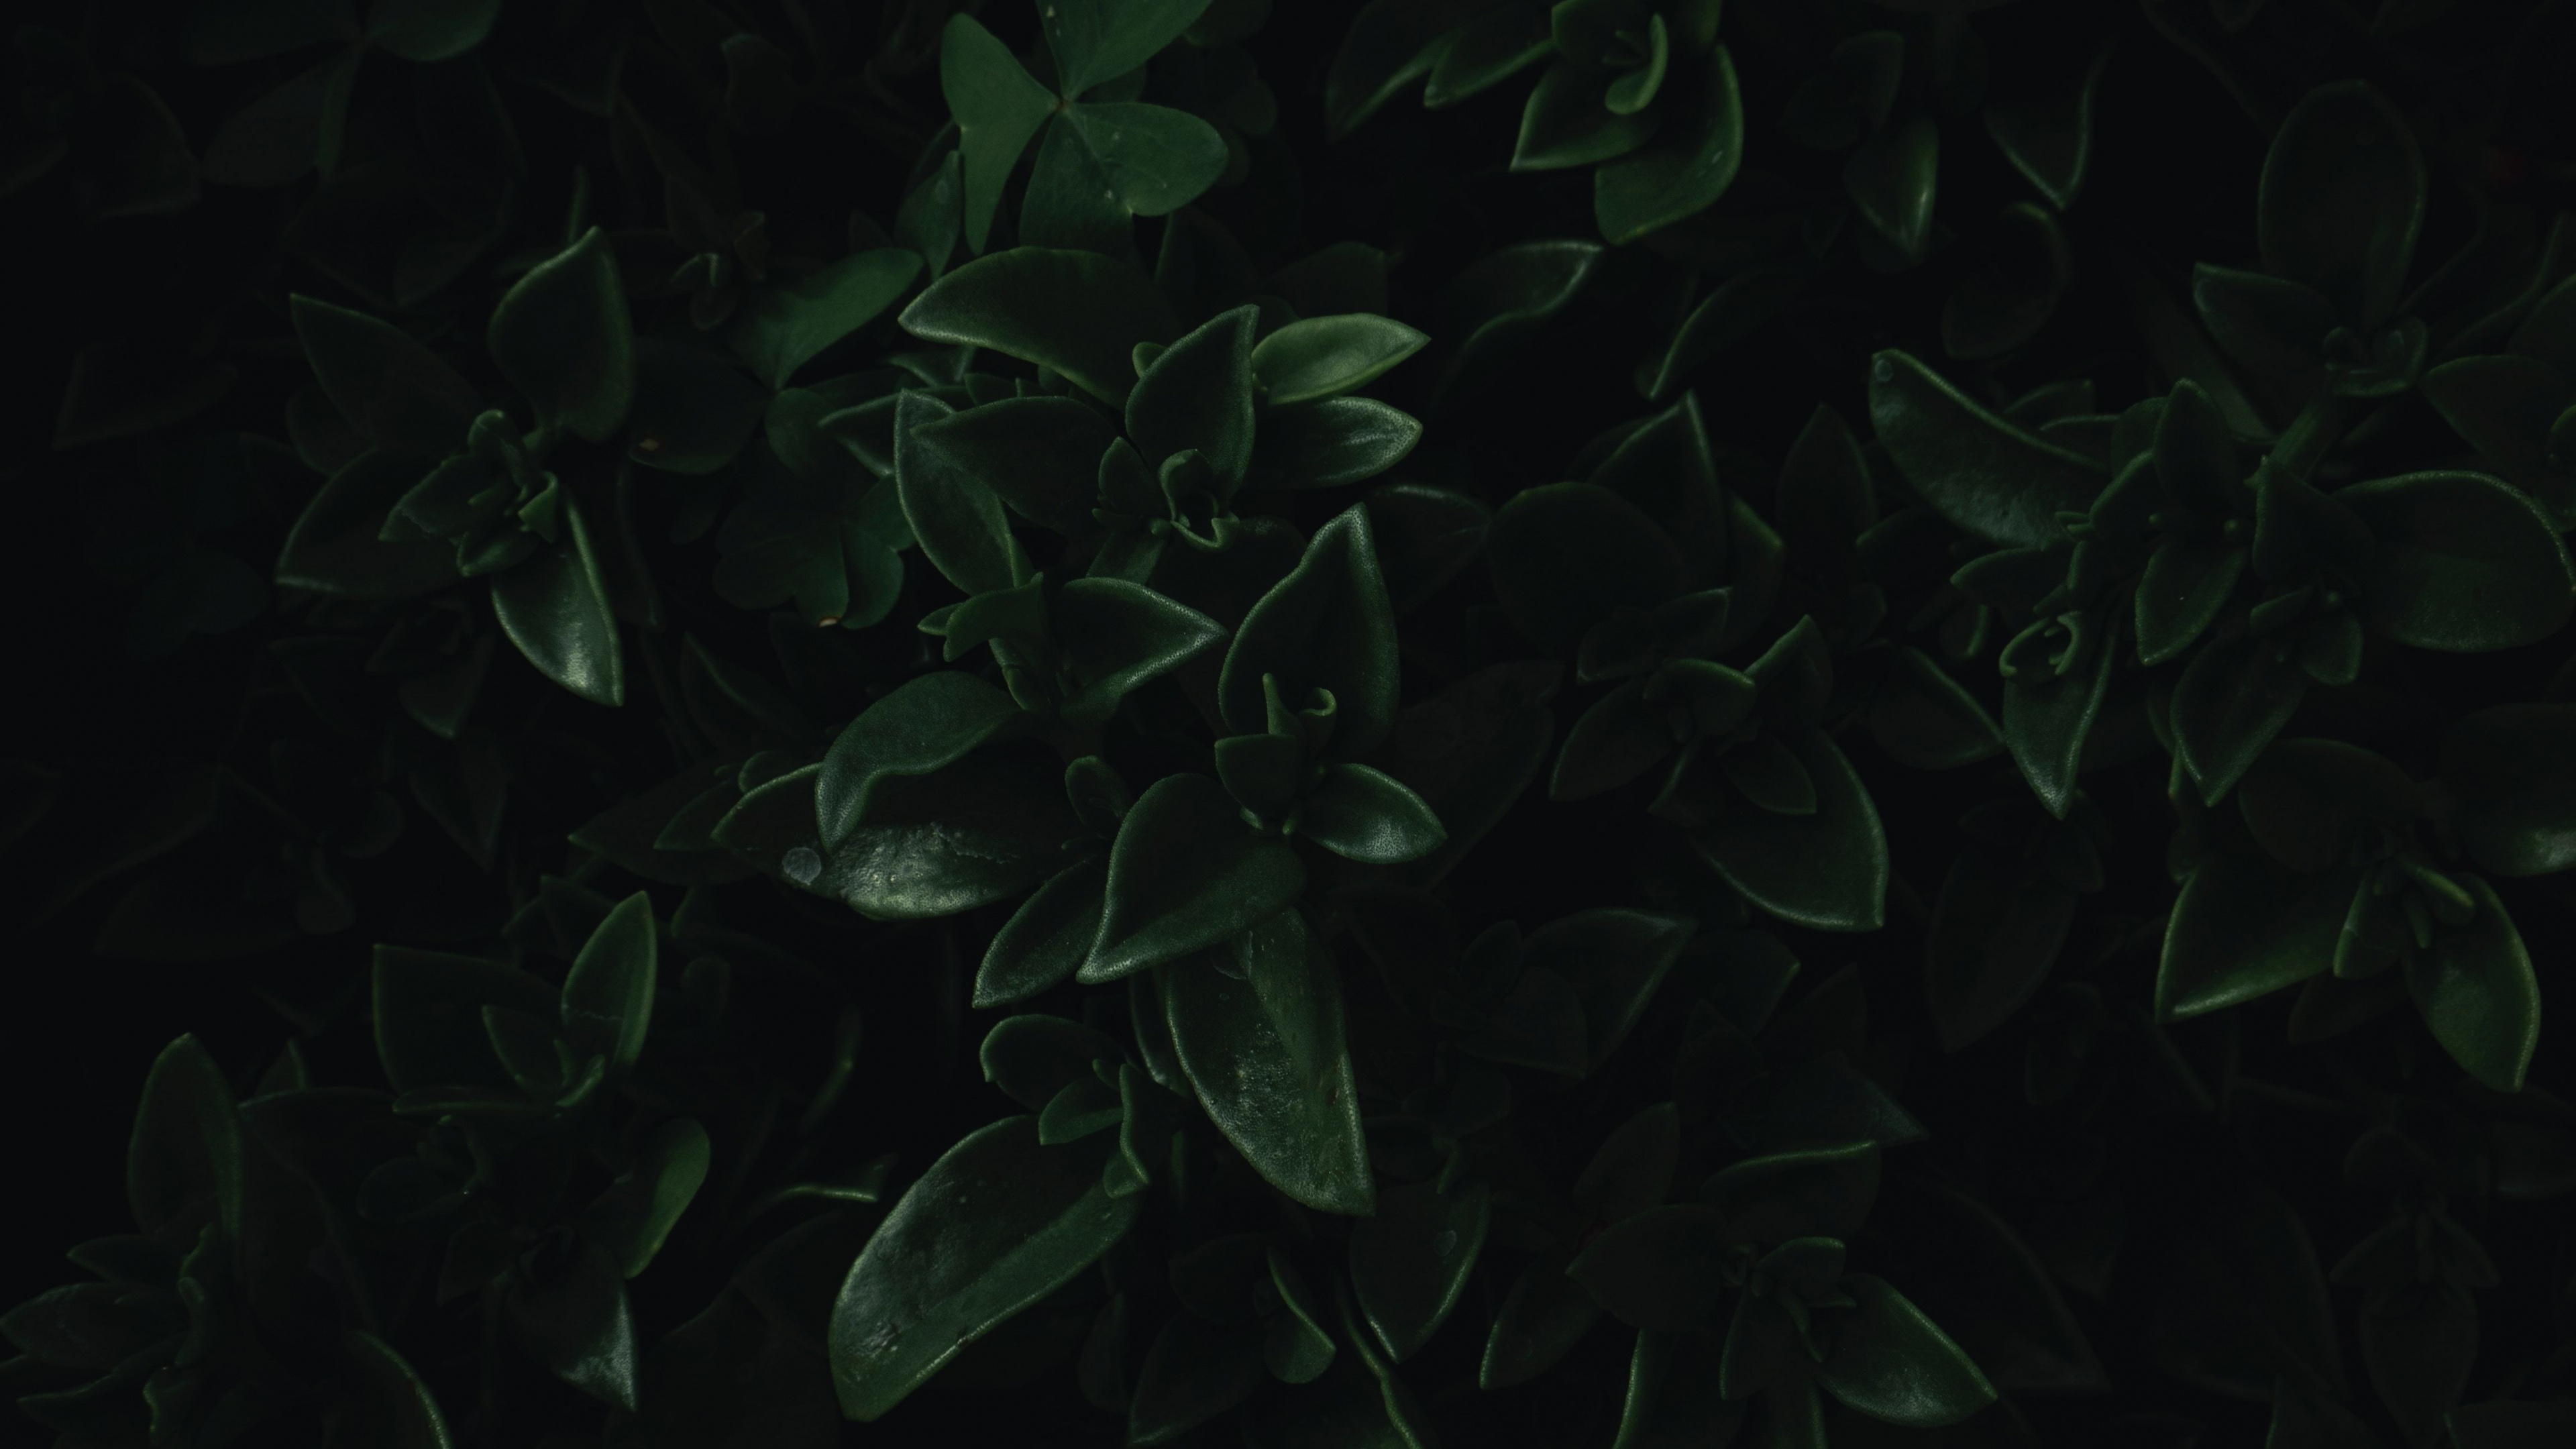 Green Leaf: Close-up dark green leaves of a bush, Awesome nature. 3840x2160 4K Wallpaper.